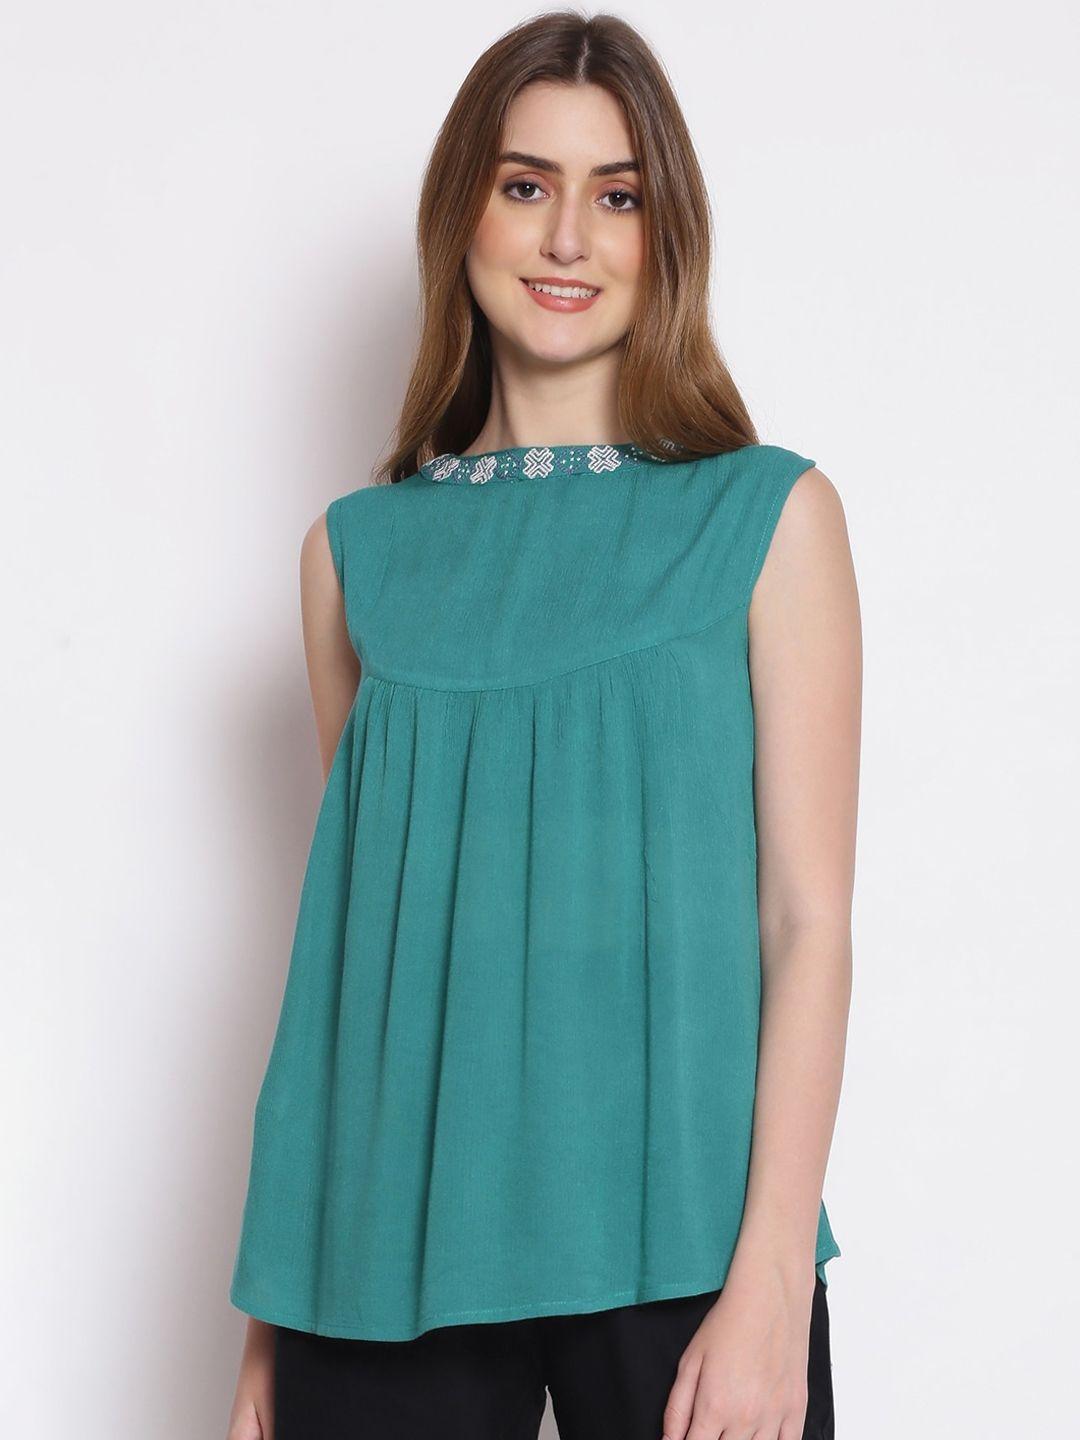 oxolloxo-green-crepe-a-line-top